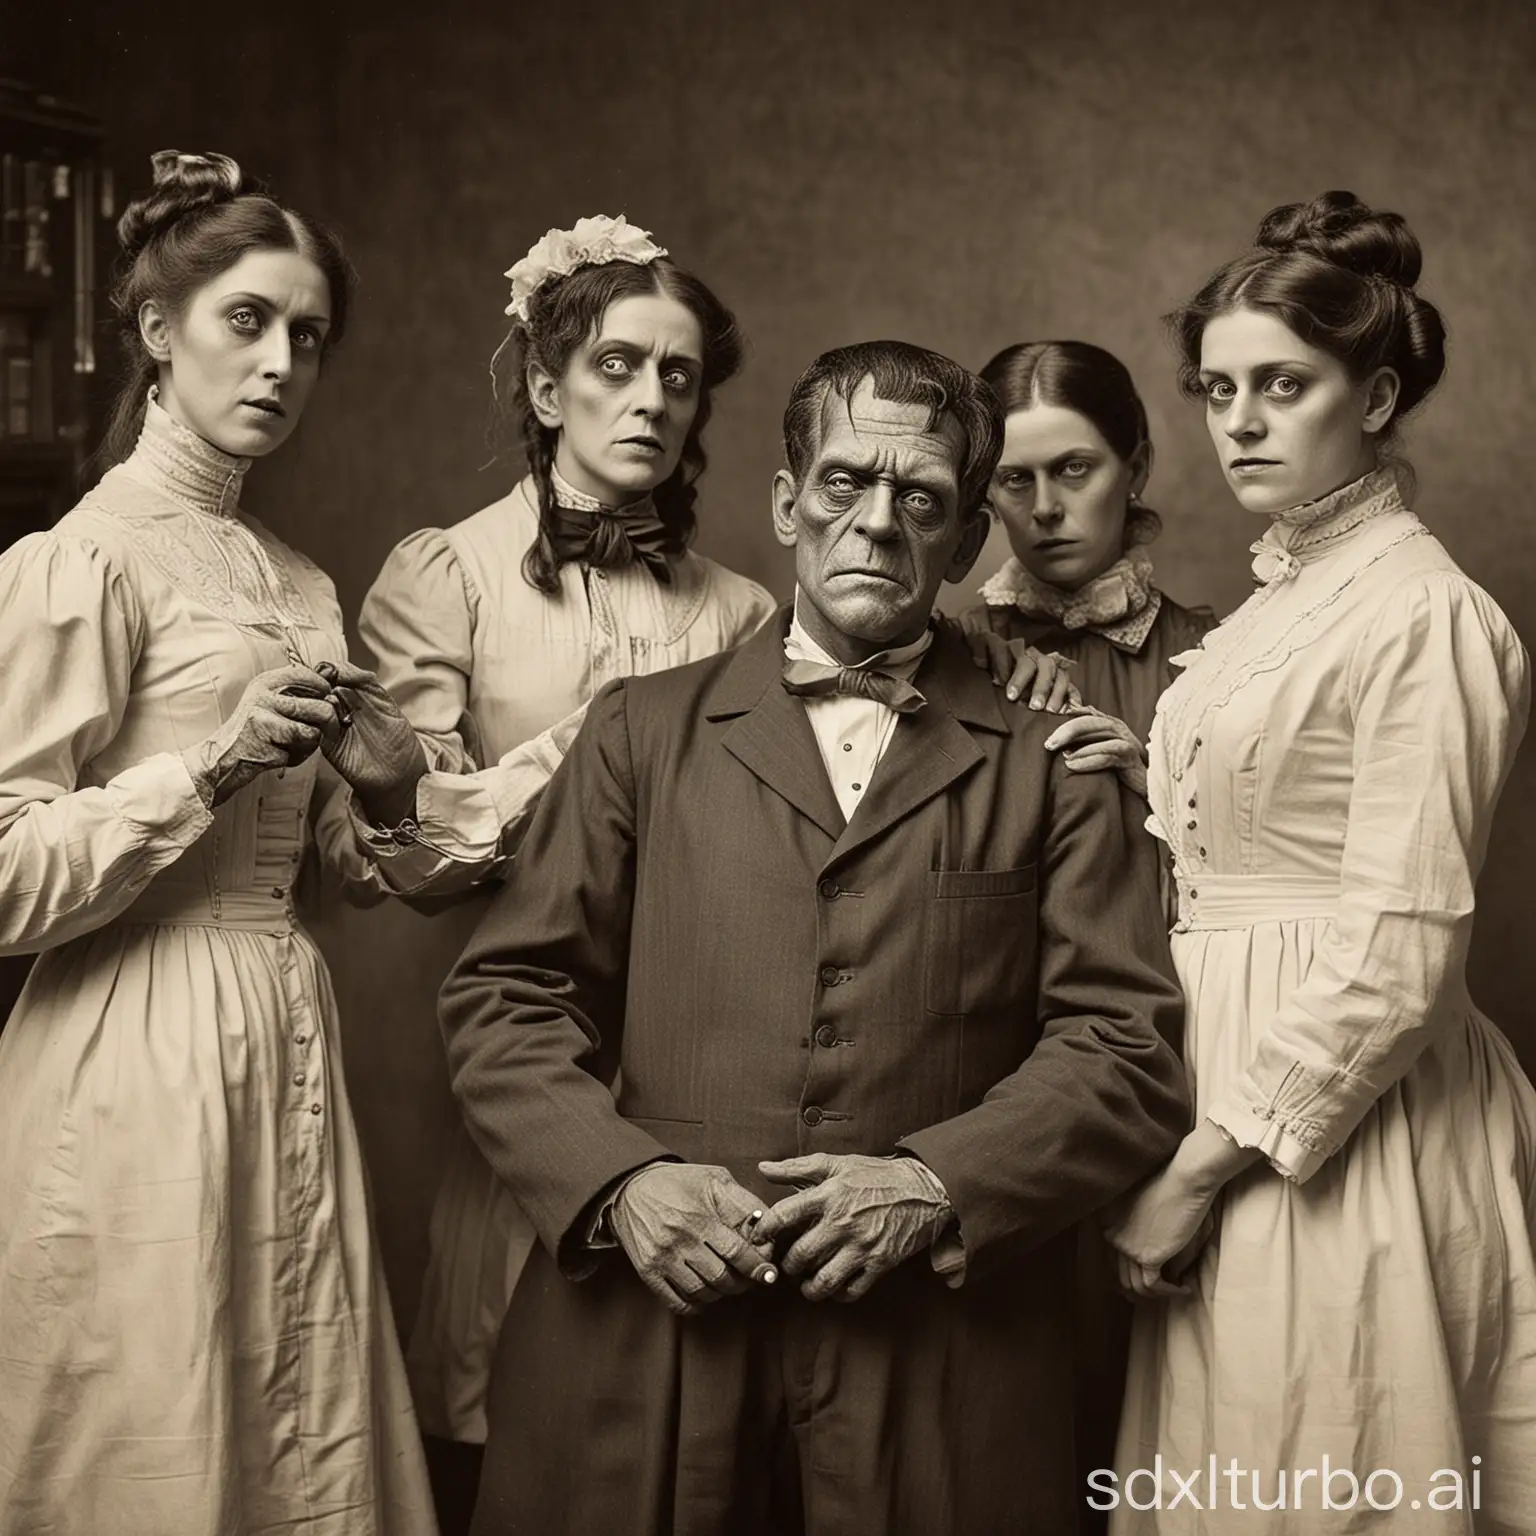 Victorian people being turned into Frankenstein monsters by a mad scientist.